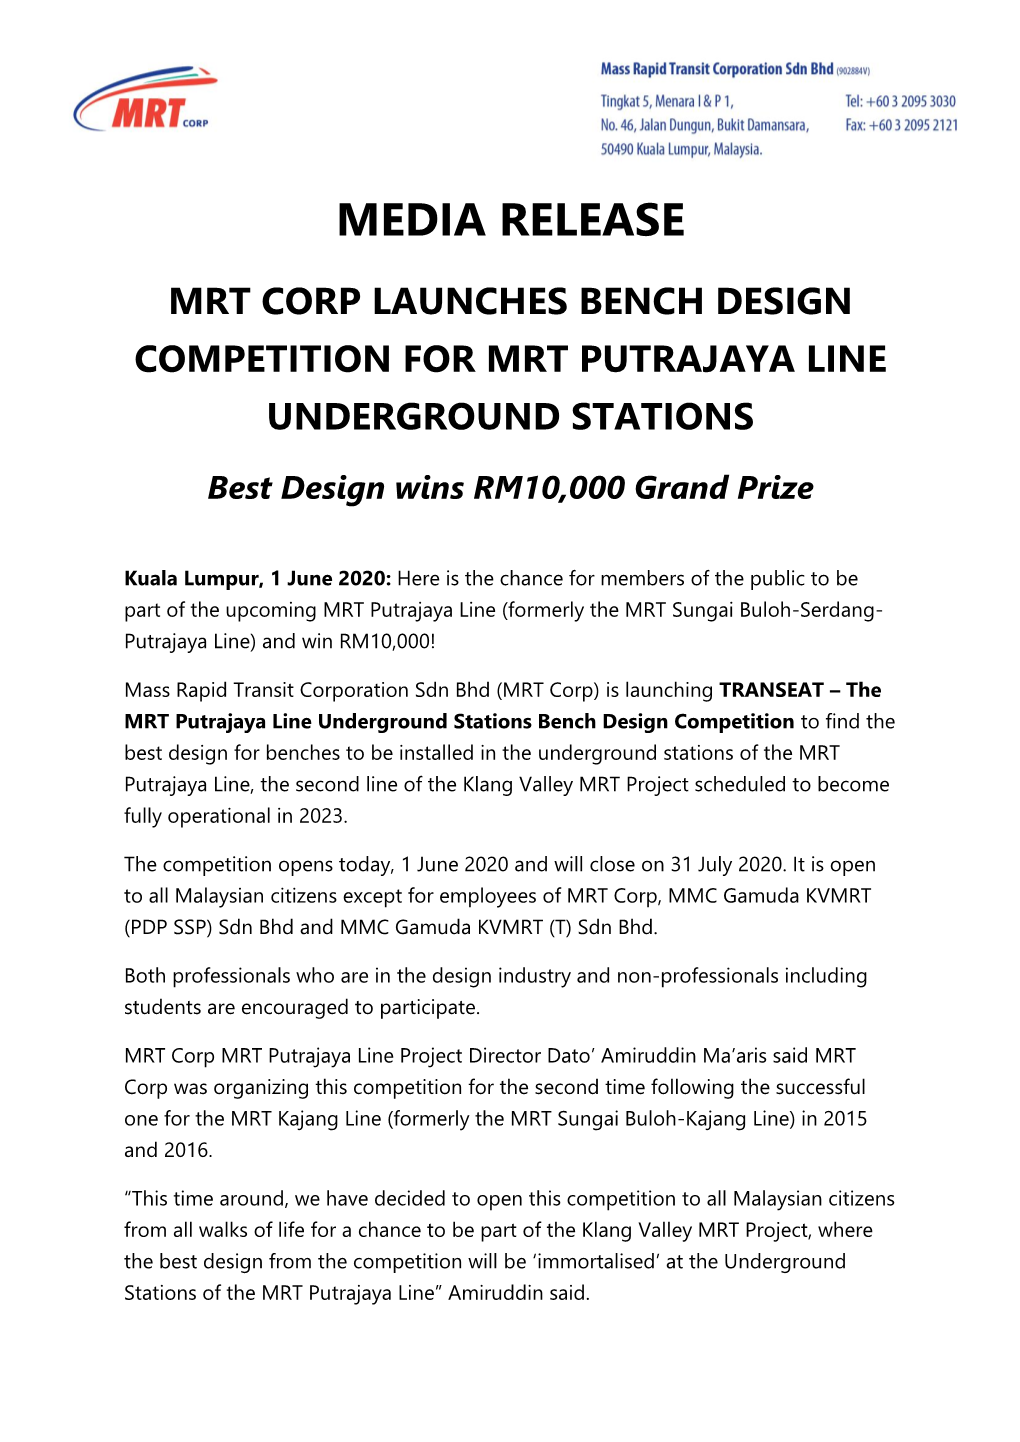 Mrt Corp Launches Bench Design Competition for Mrt Putrajaya Line Underground Stations